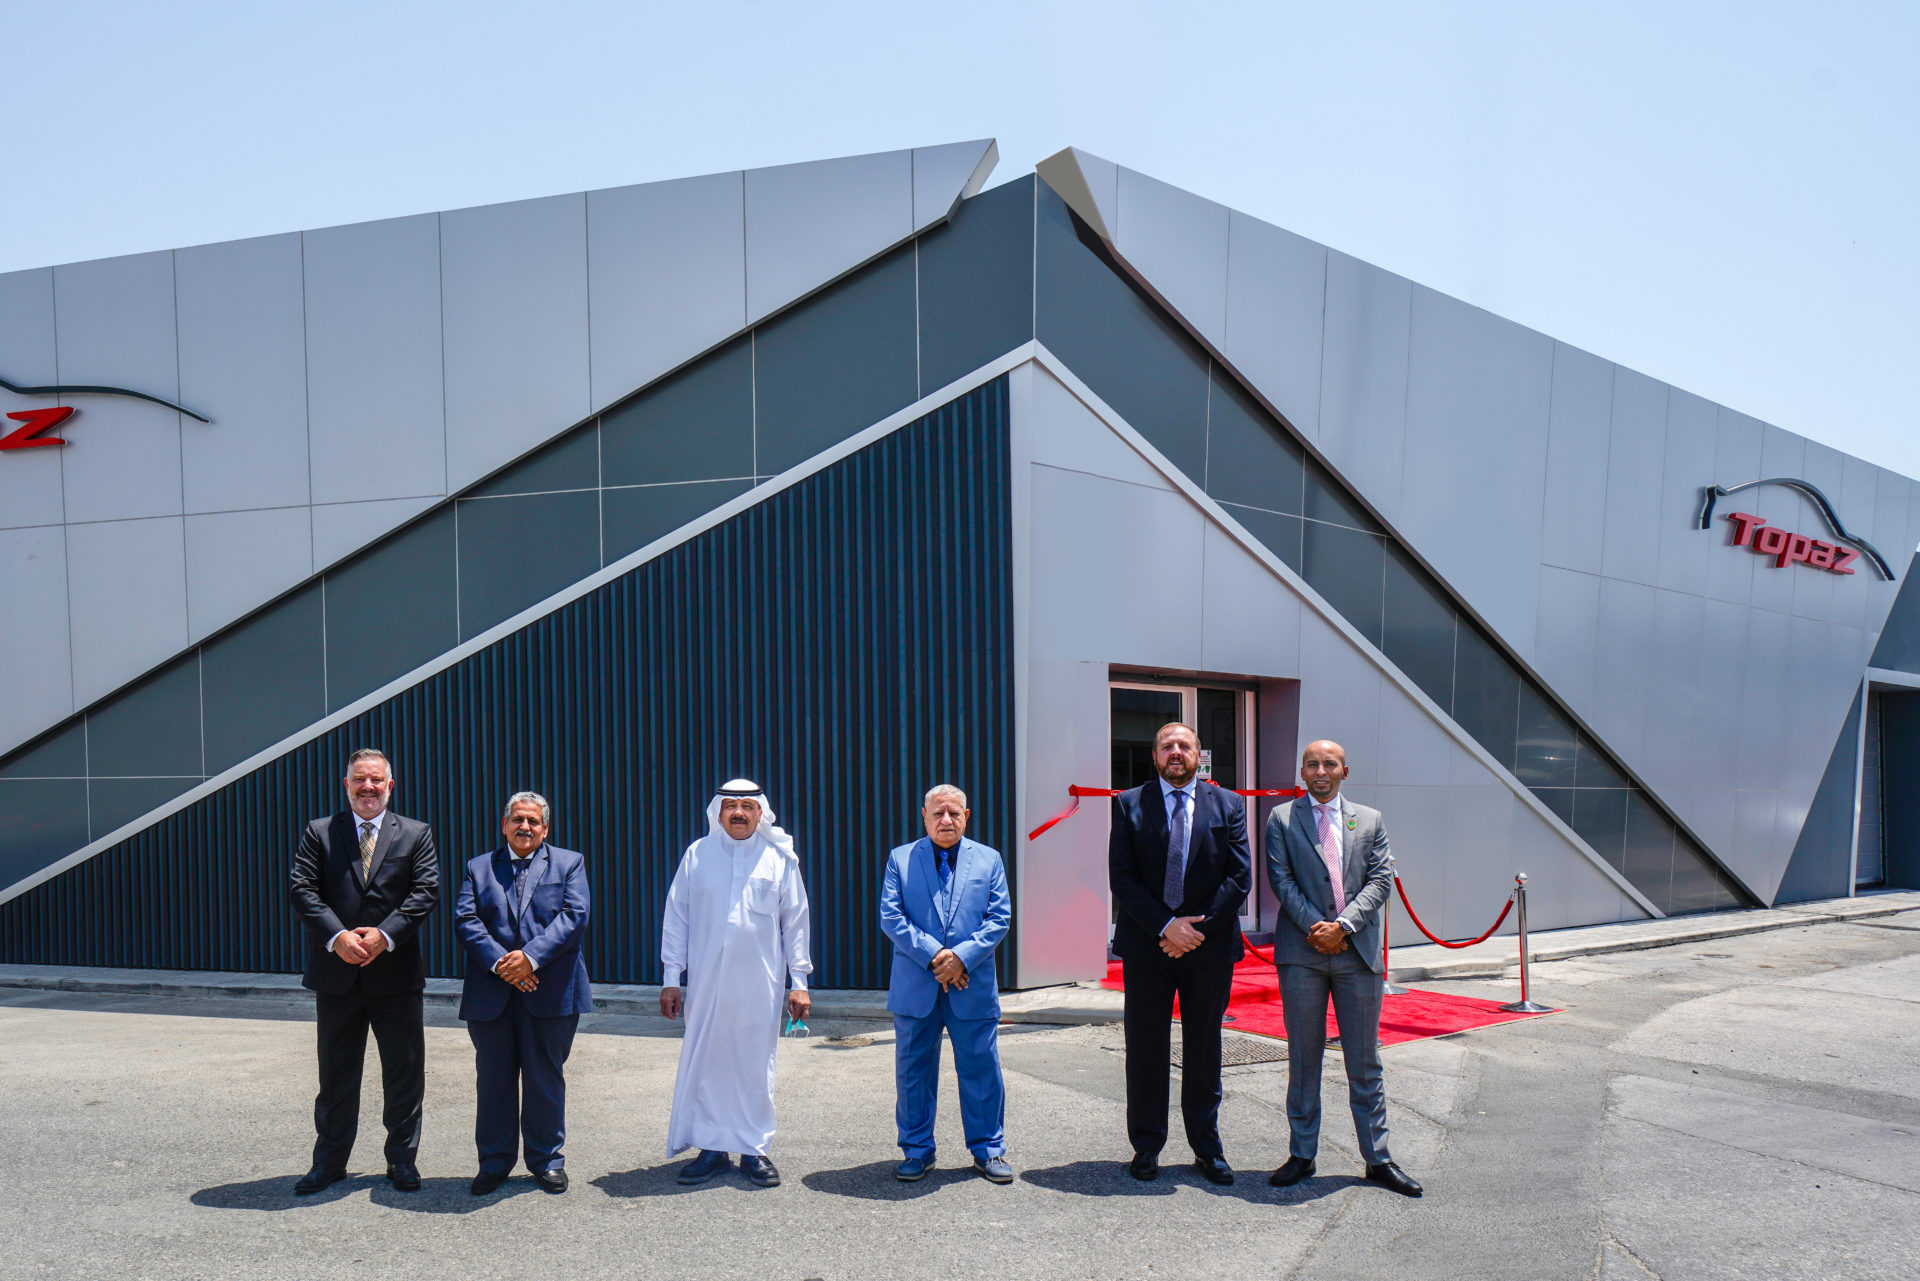 WORLD CLASS TOPAZ DETAILING OPENS ITS FIRST EVER OVERSEAS BRANCH IN THE KINGDOM OF BAHRAIN